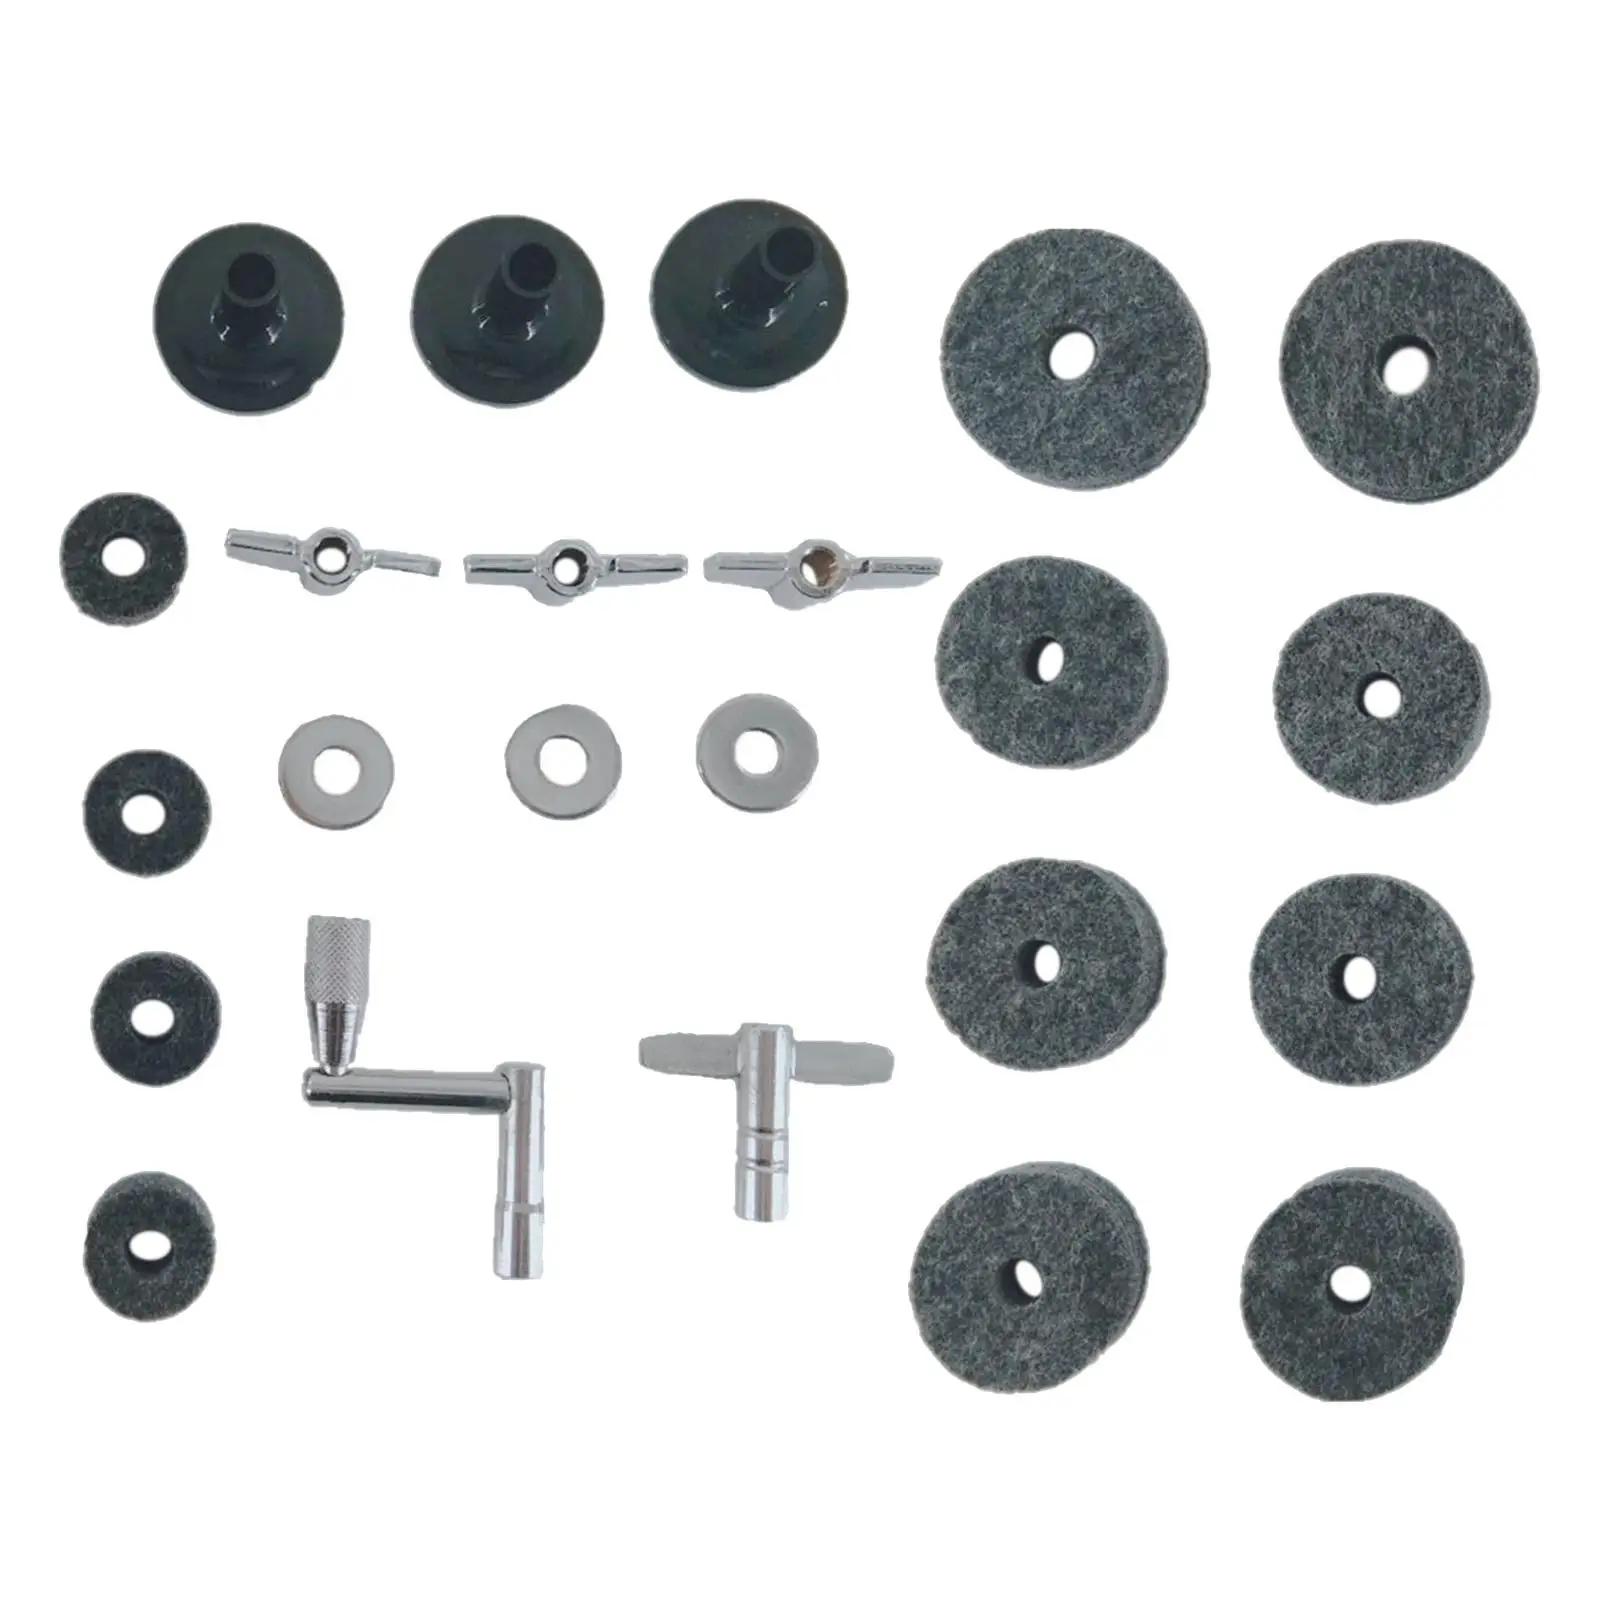 23x Drum Replacement Parts Cymbal Felt Washer Musical Accessories Cymbal Replacement Replacement Accessories Equipment Drum Set